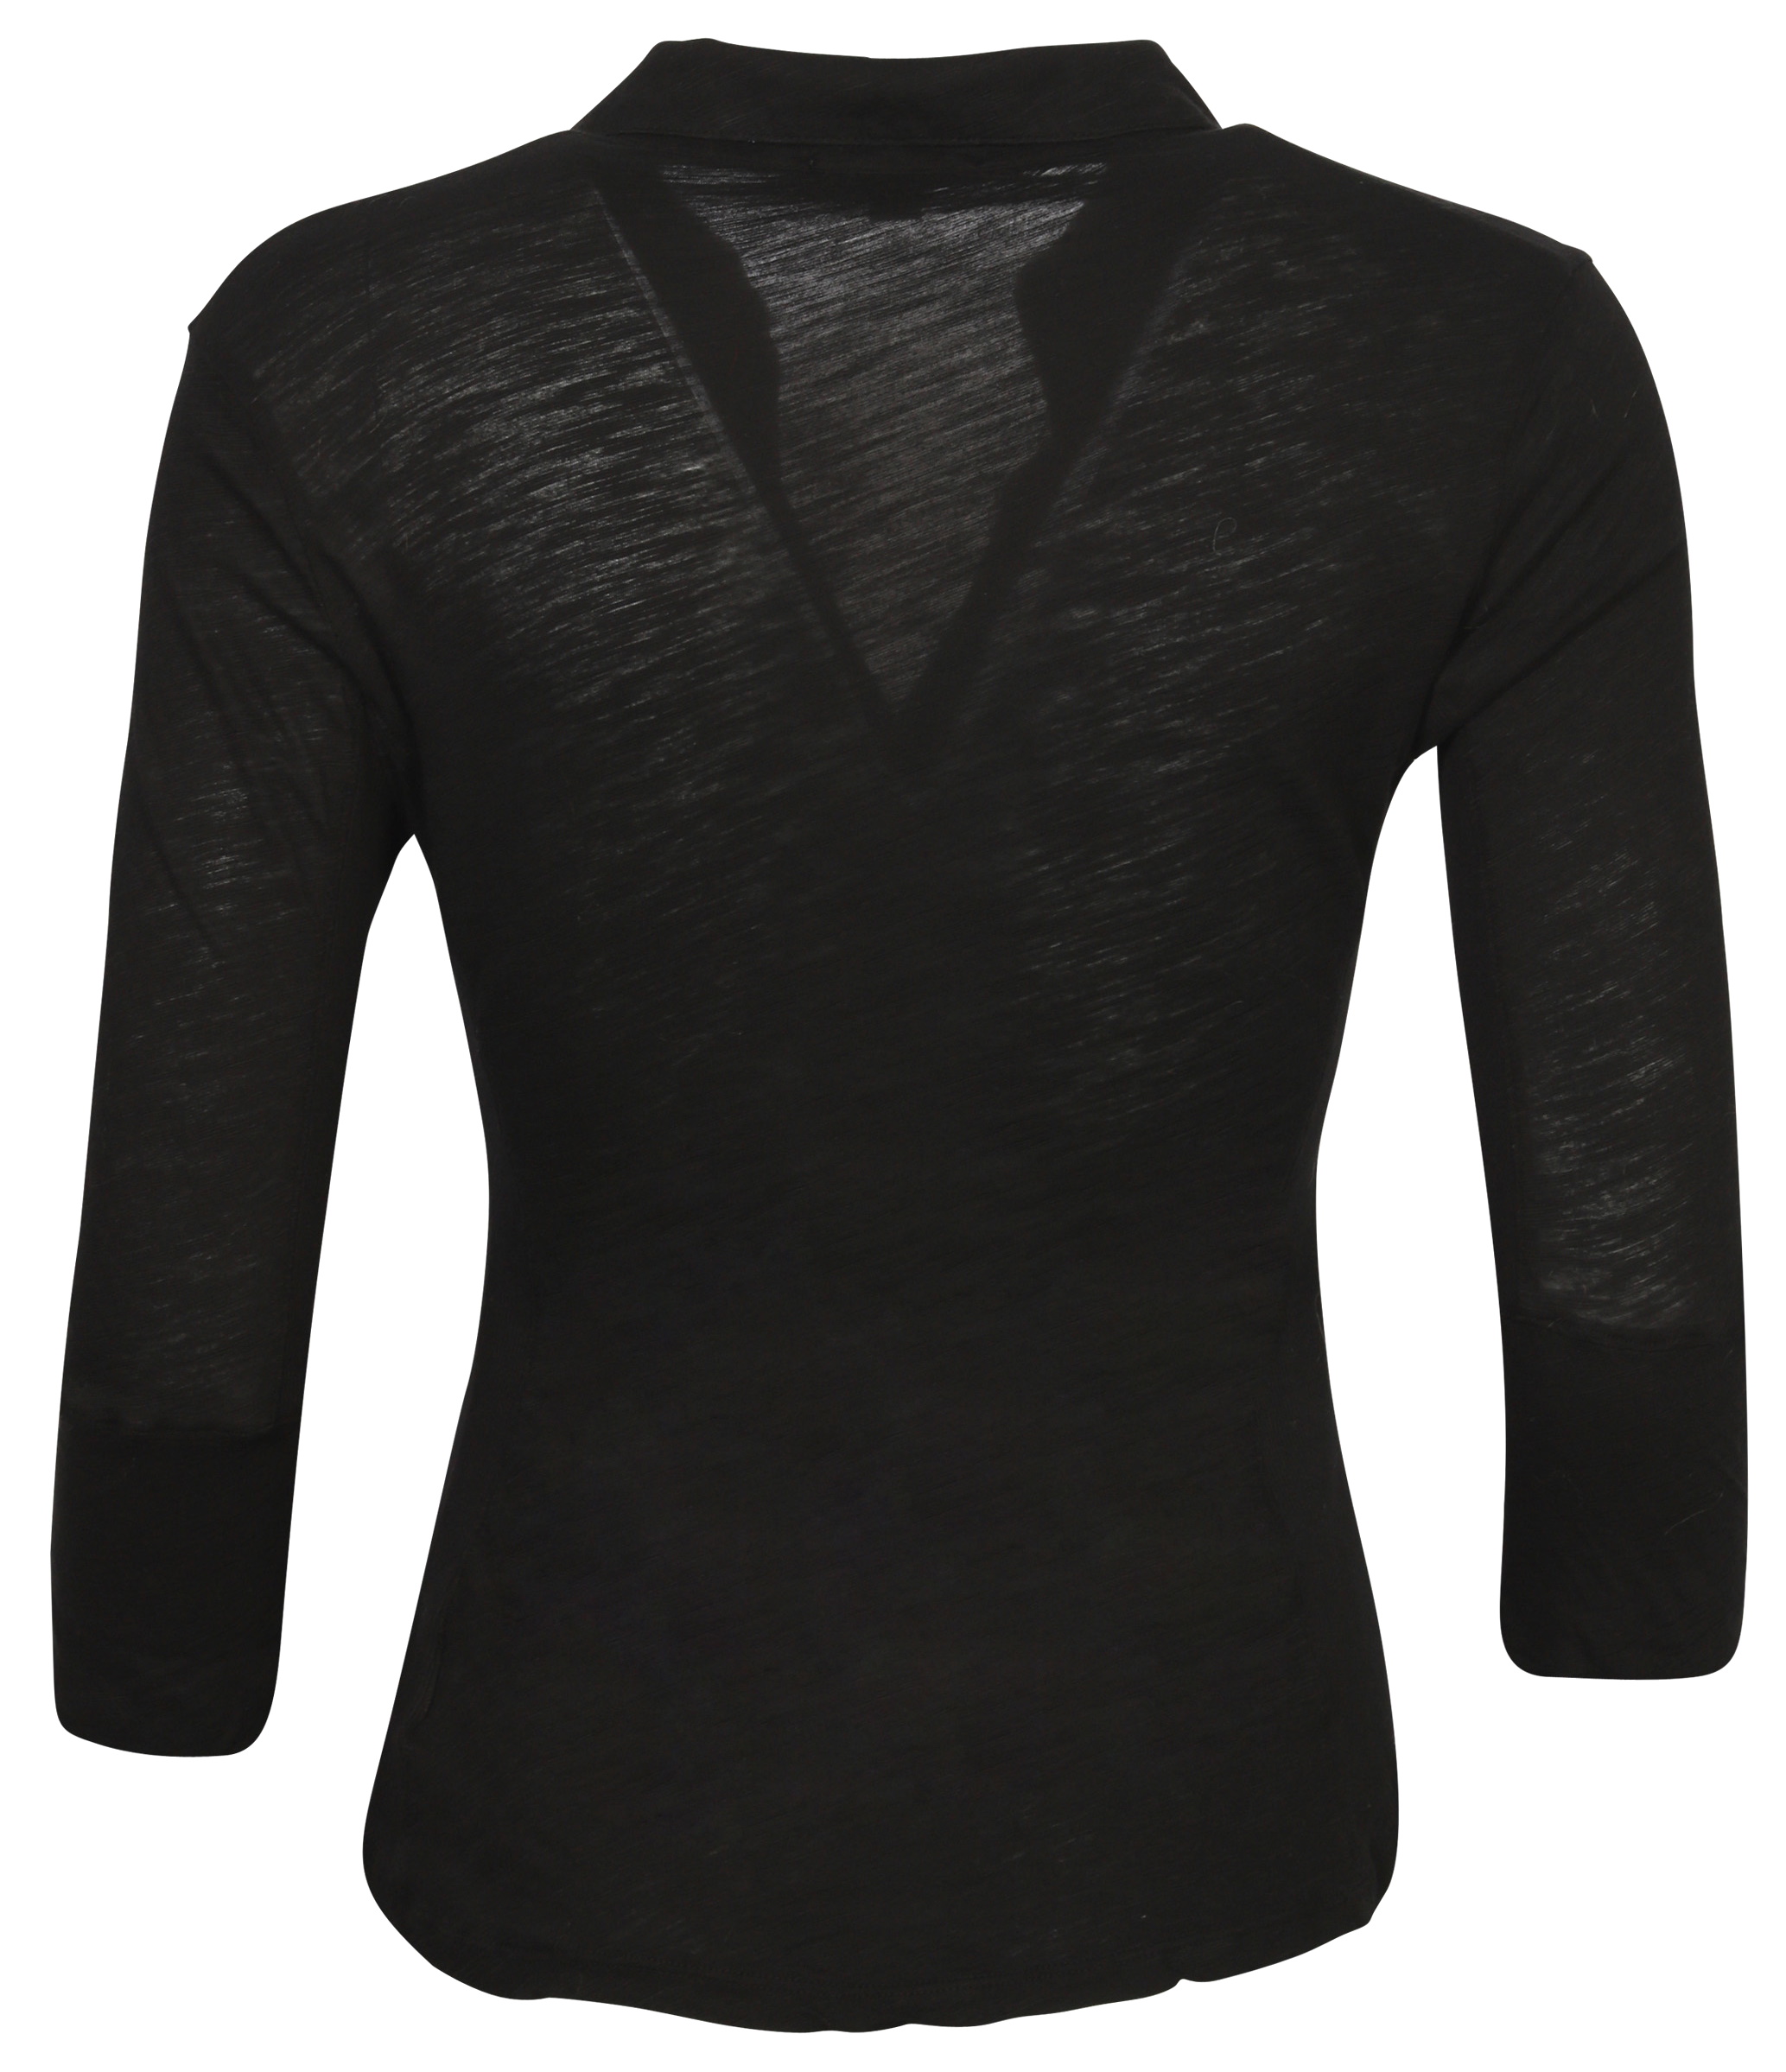 JAMES PERSE Contrast Panel Shirt in Black 1/S